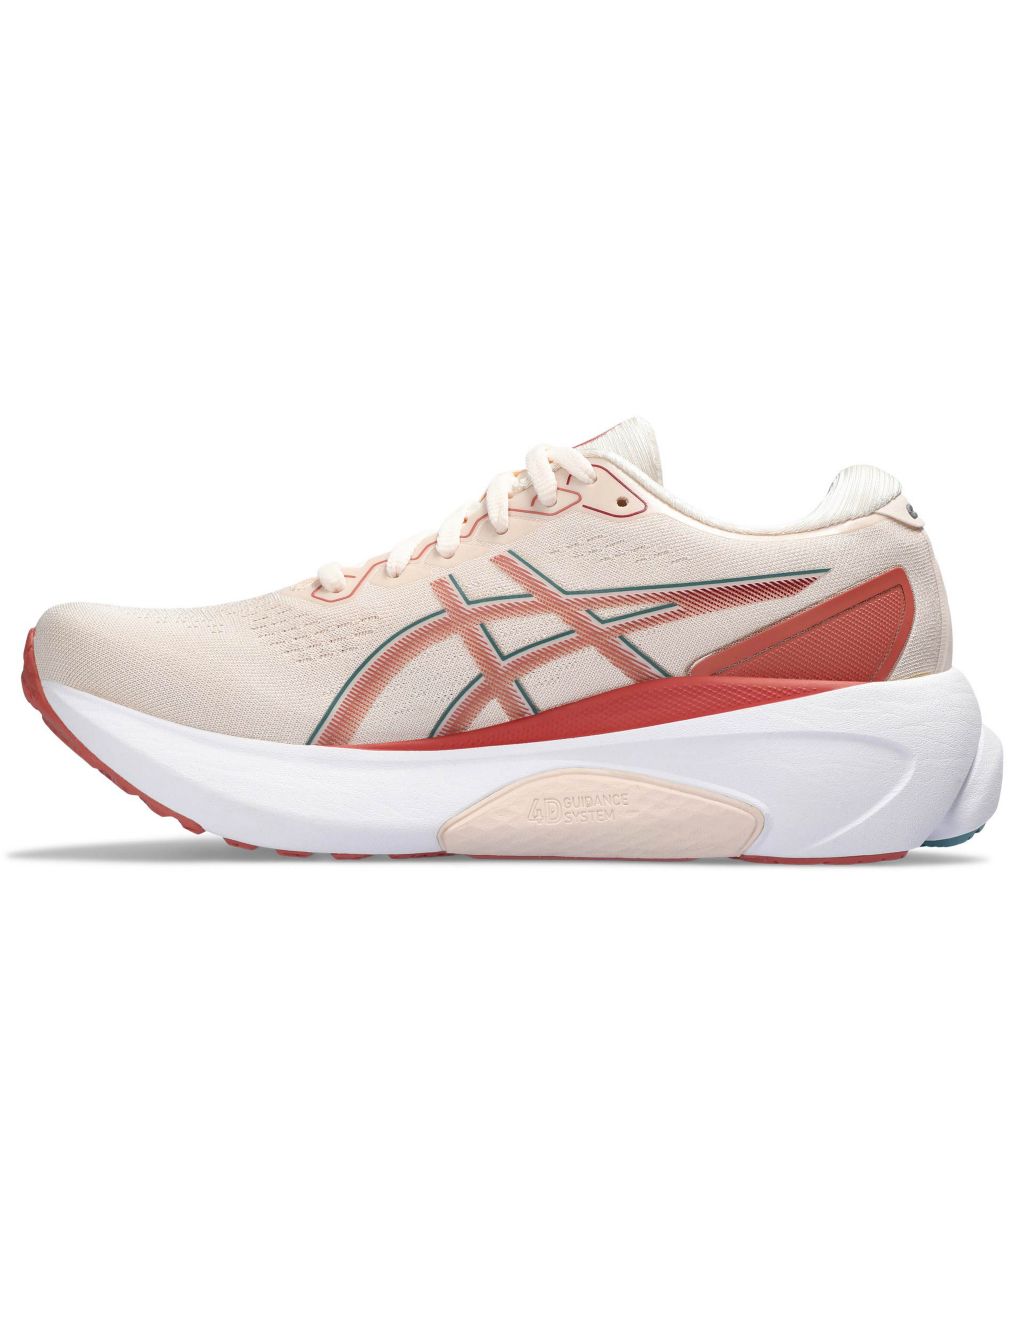 Gel-Kayano 30 Lace Up Trainers image 5